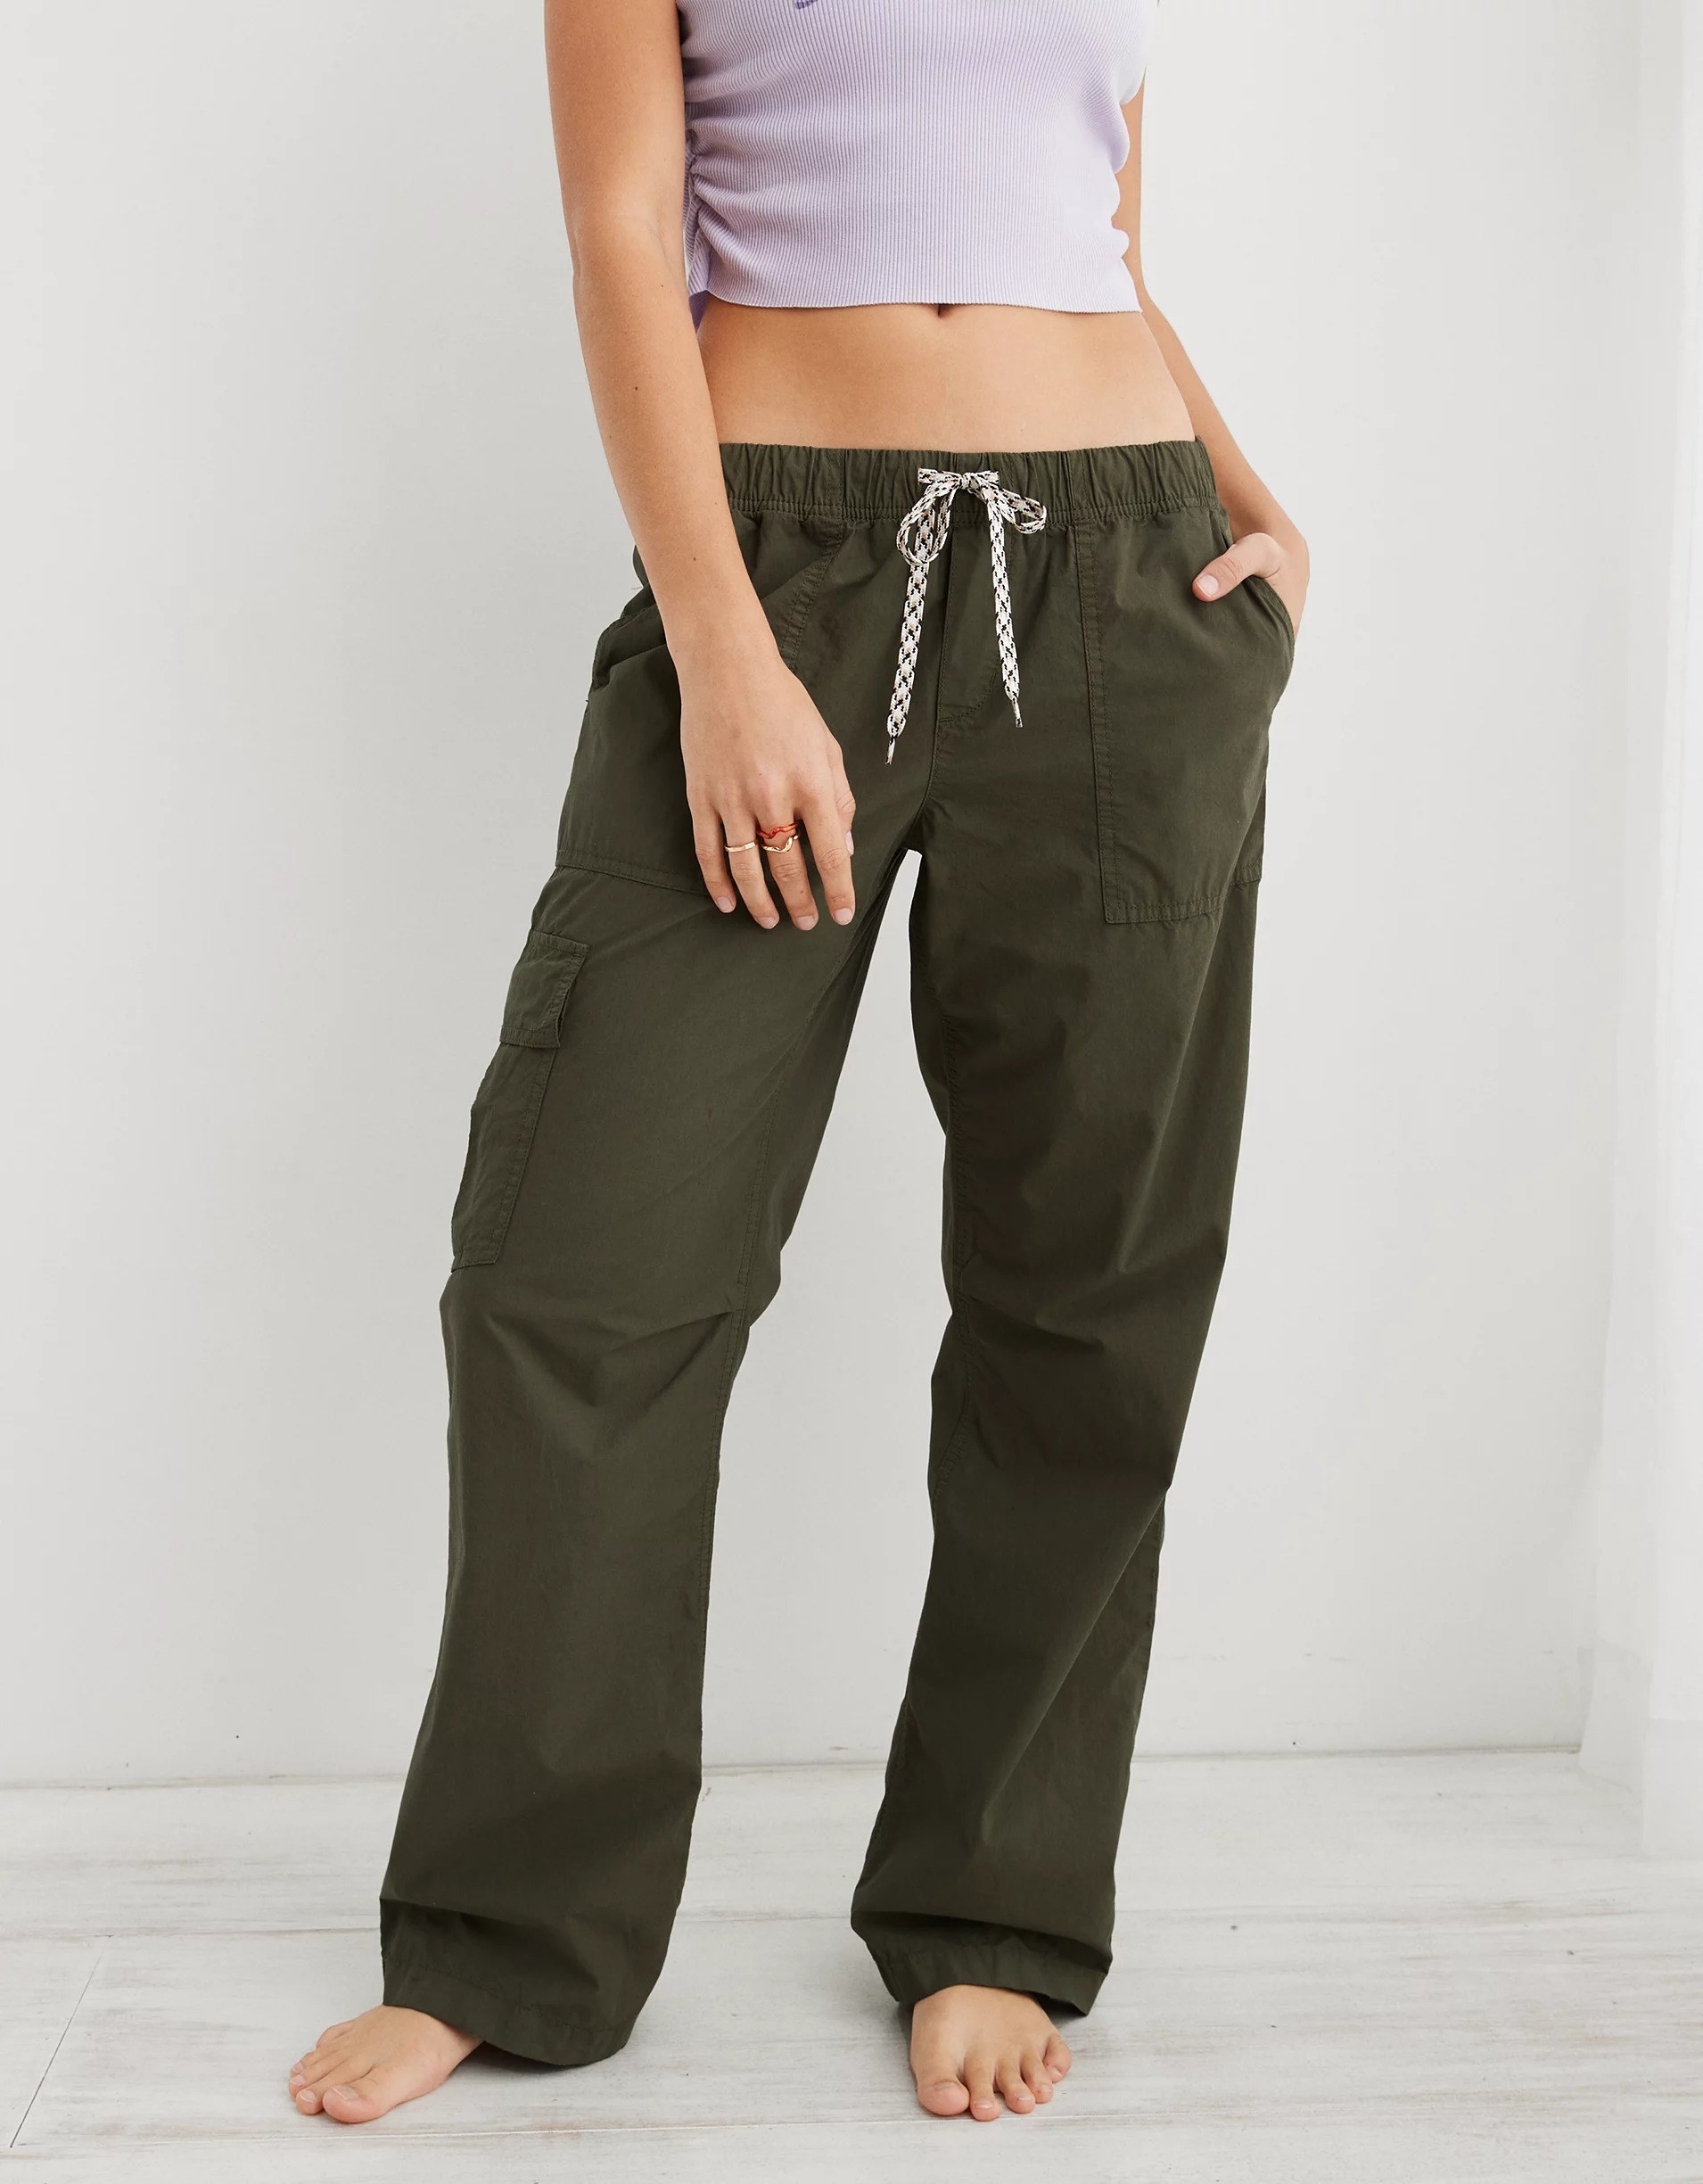 A model shot from the neck down wearing a crop top and the pants in olive